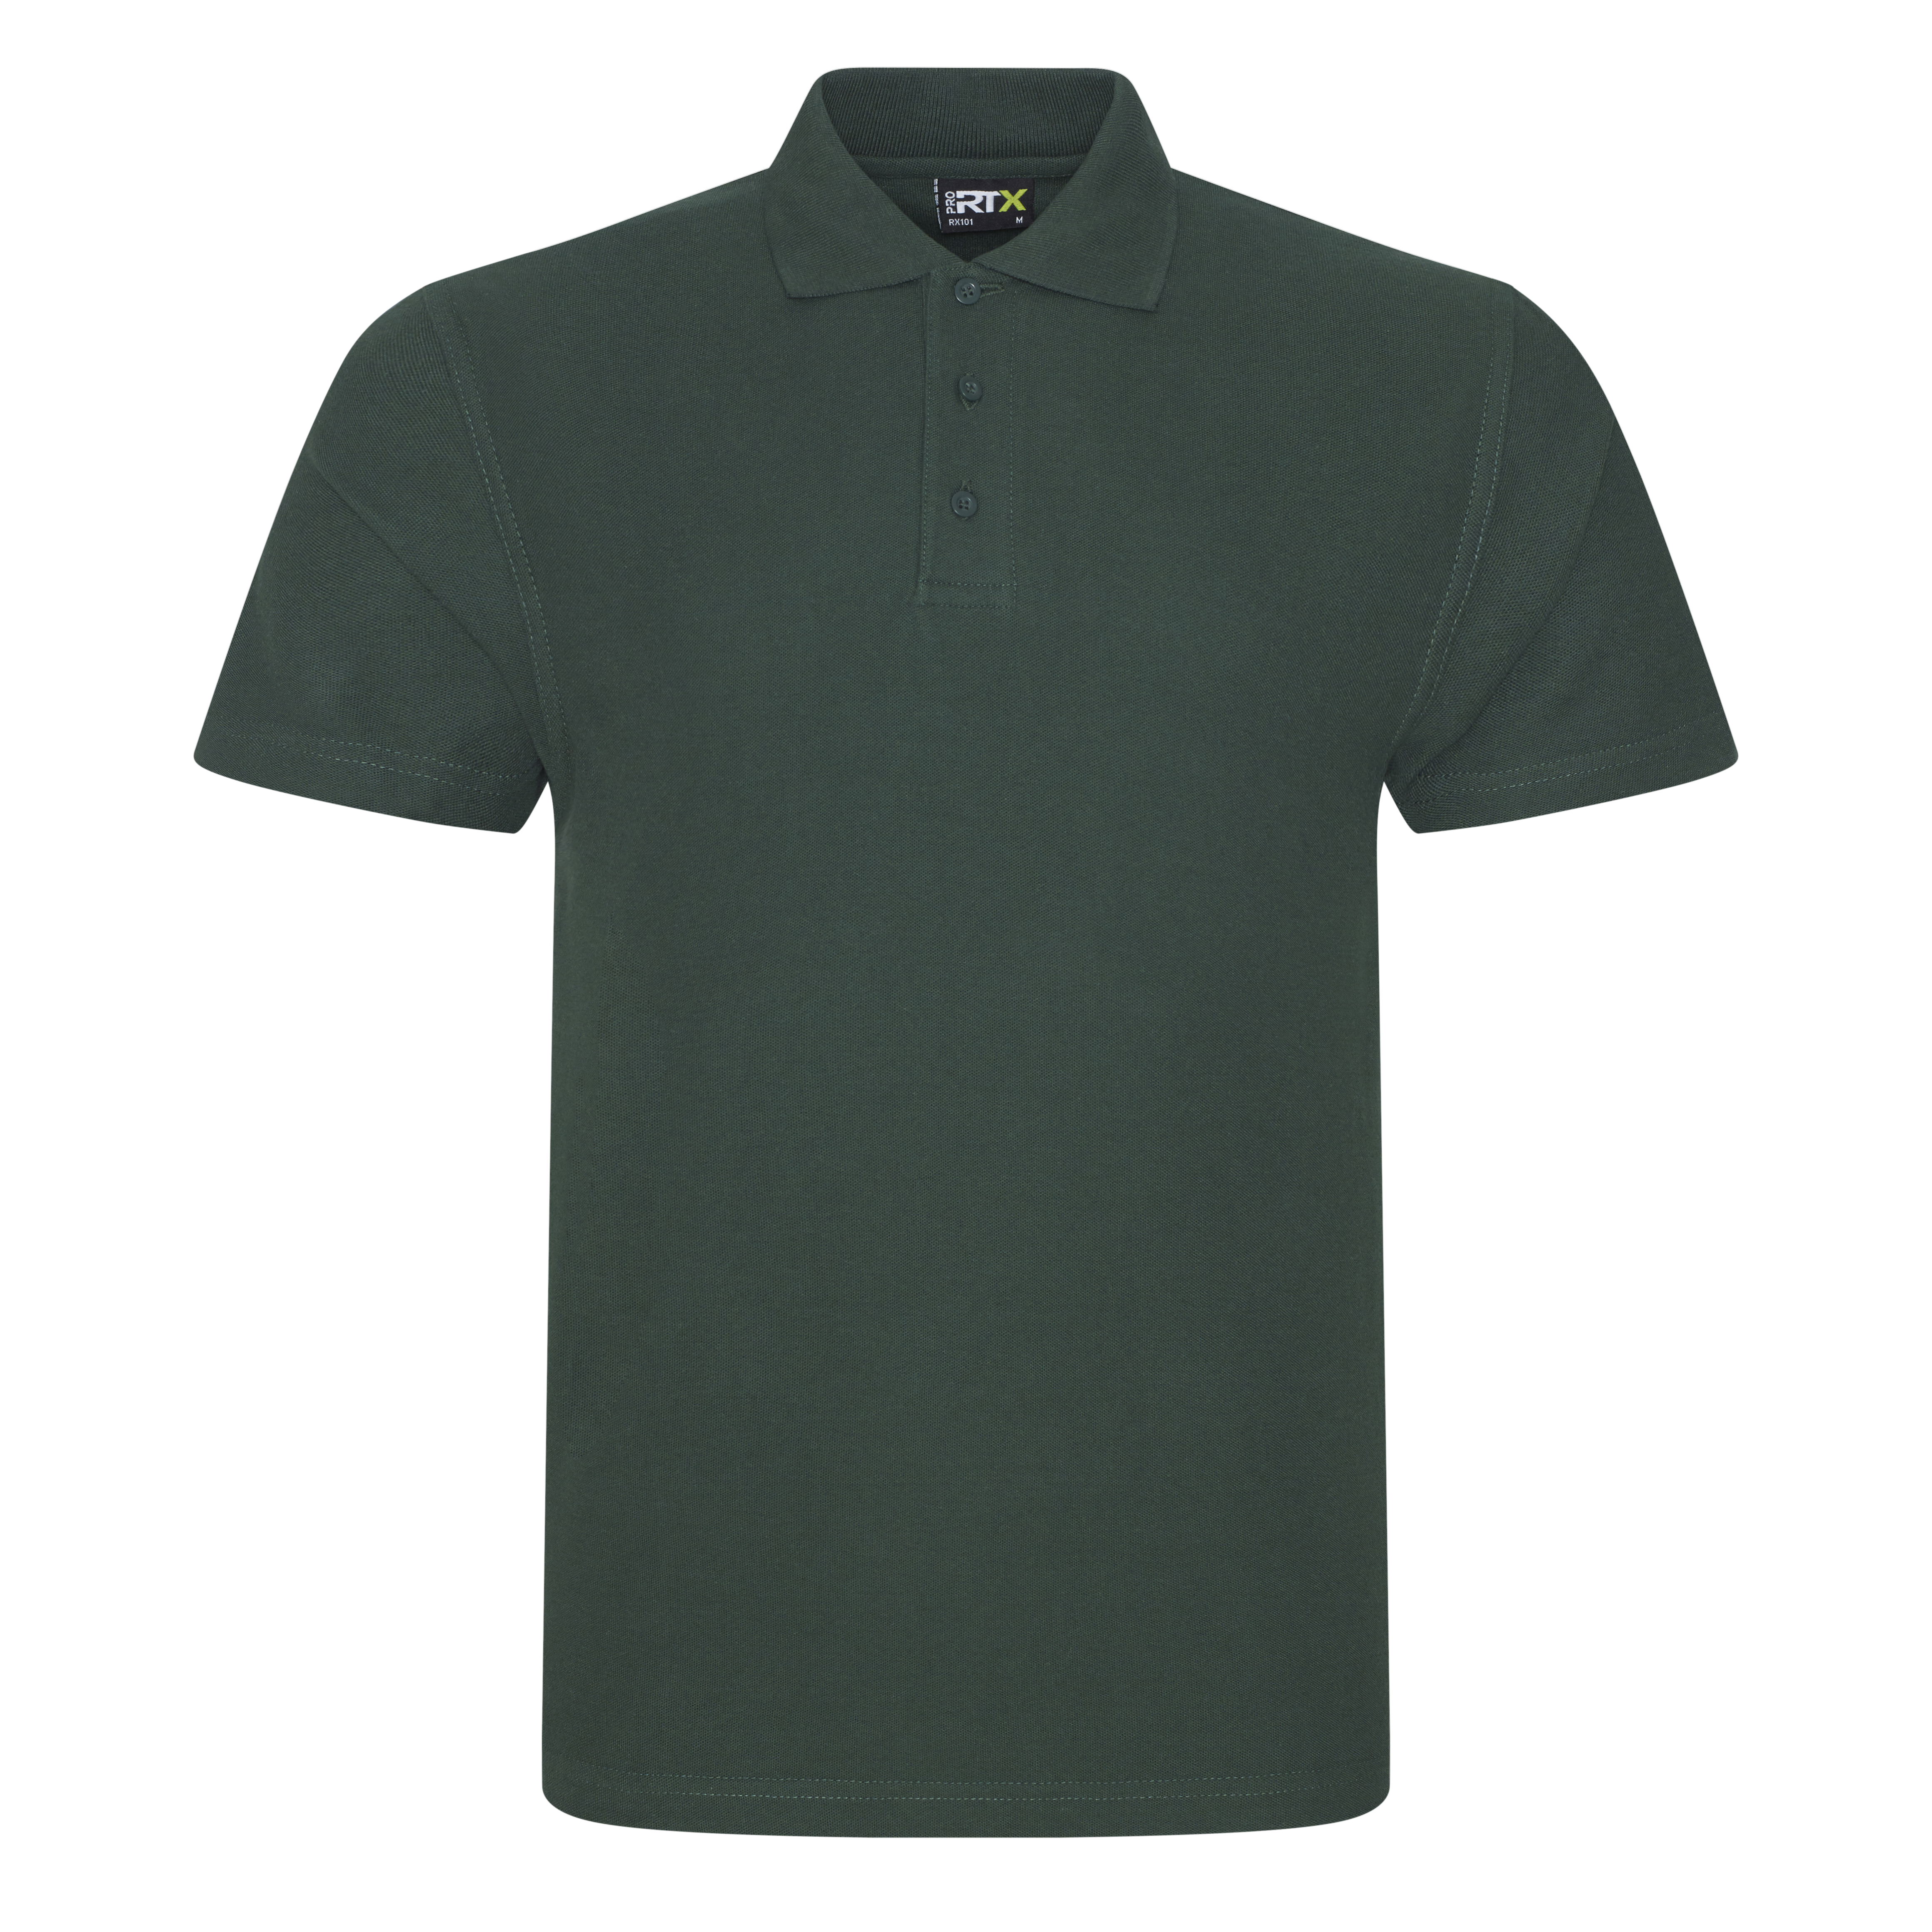 ax-httpswebsystems.s3.amazonaws.comtmp_for_downloadpro-polo-bottle-green.jpg